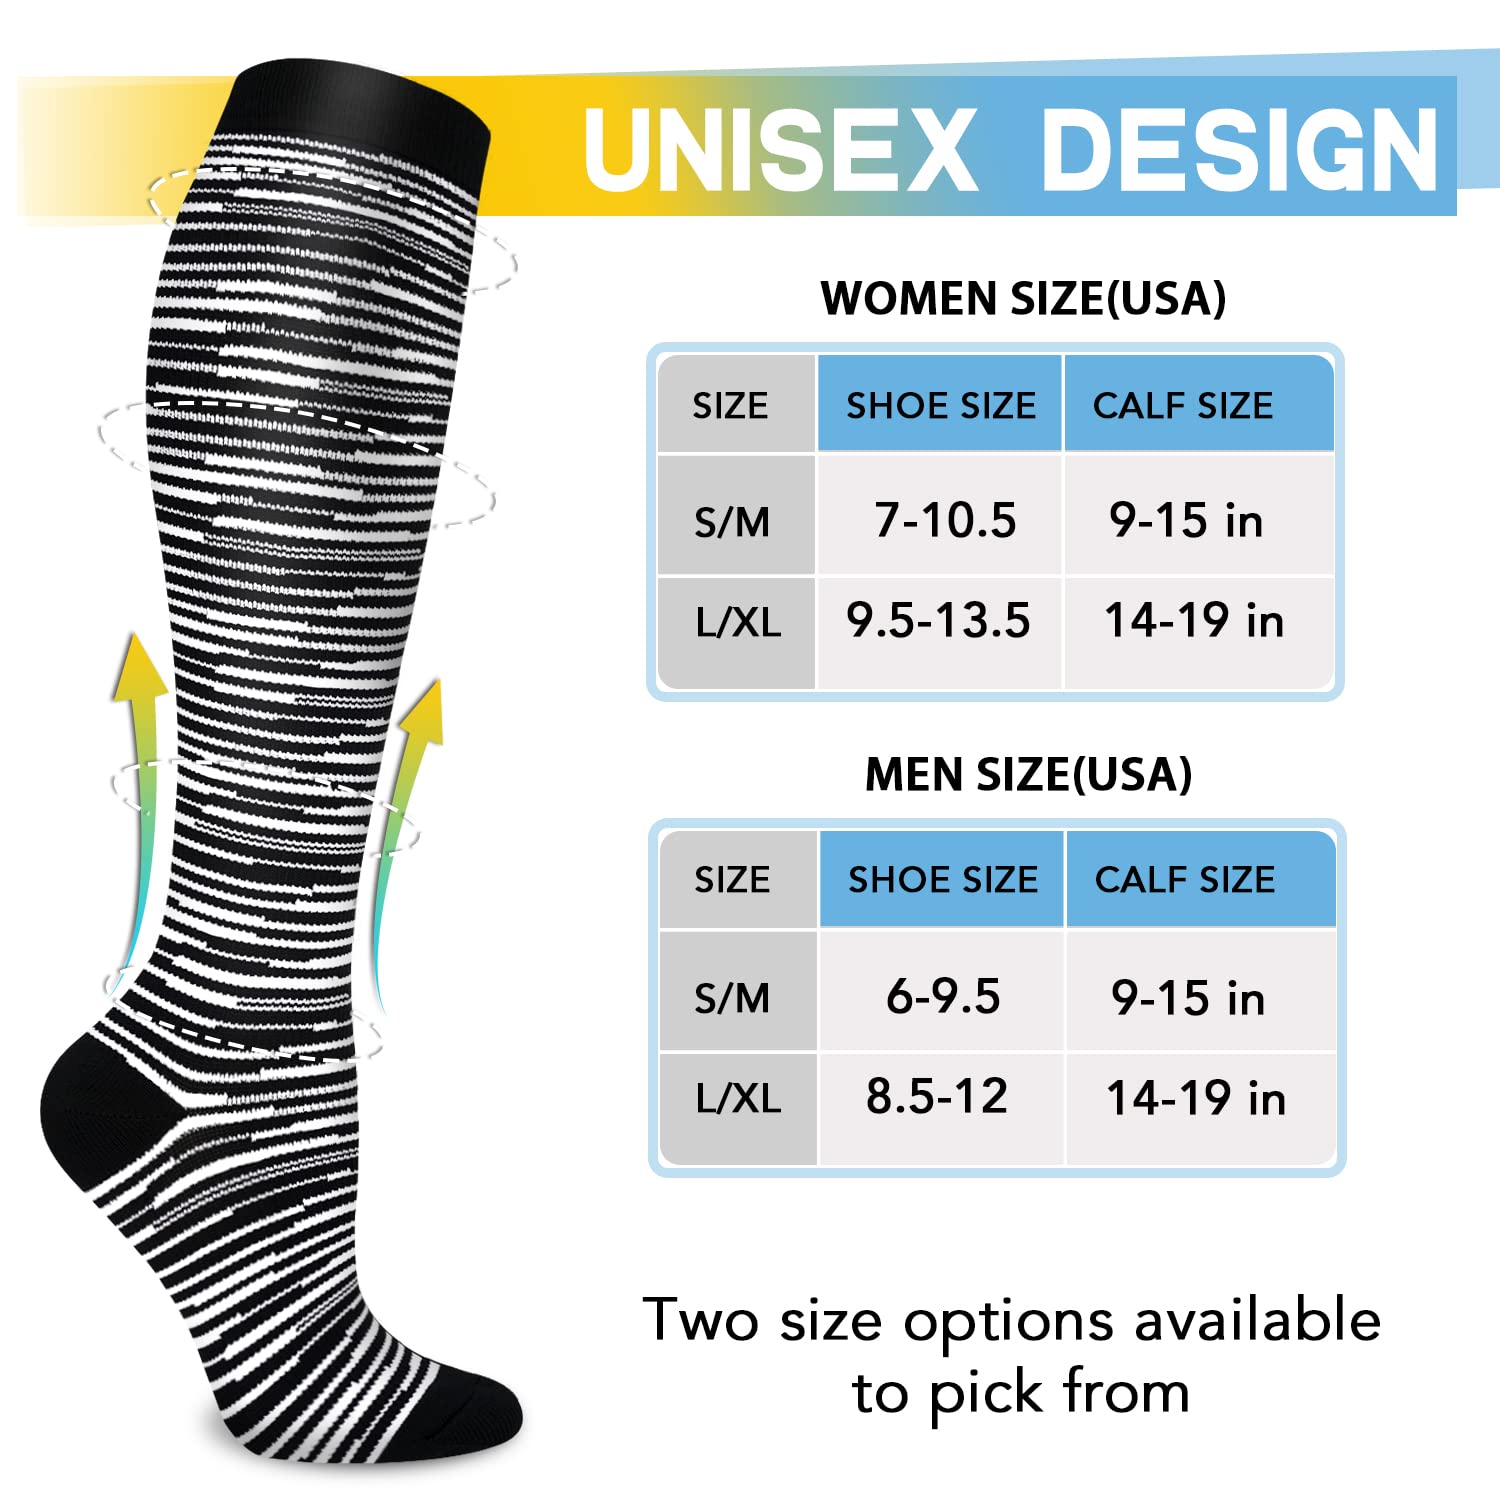 SunFeeling 6 Pairs Compression Socks for Women & Men Circulation - Best Support for Nurses,Running,Athletic,Sports,Small-Medium